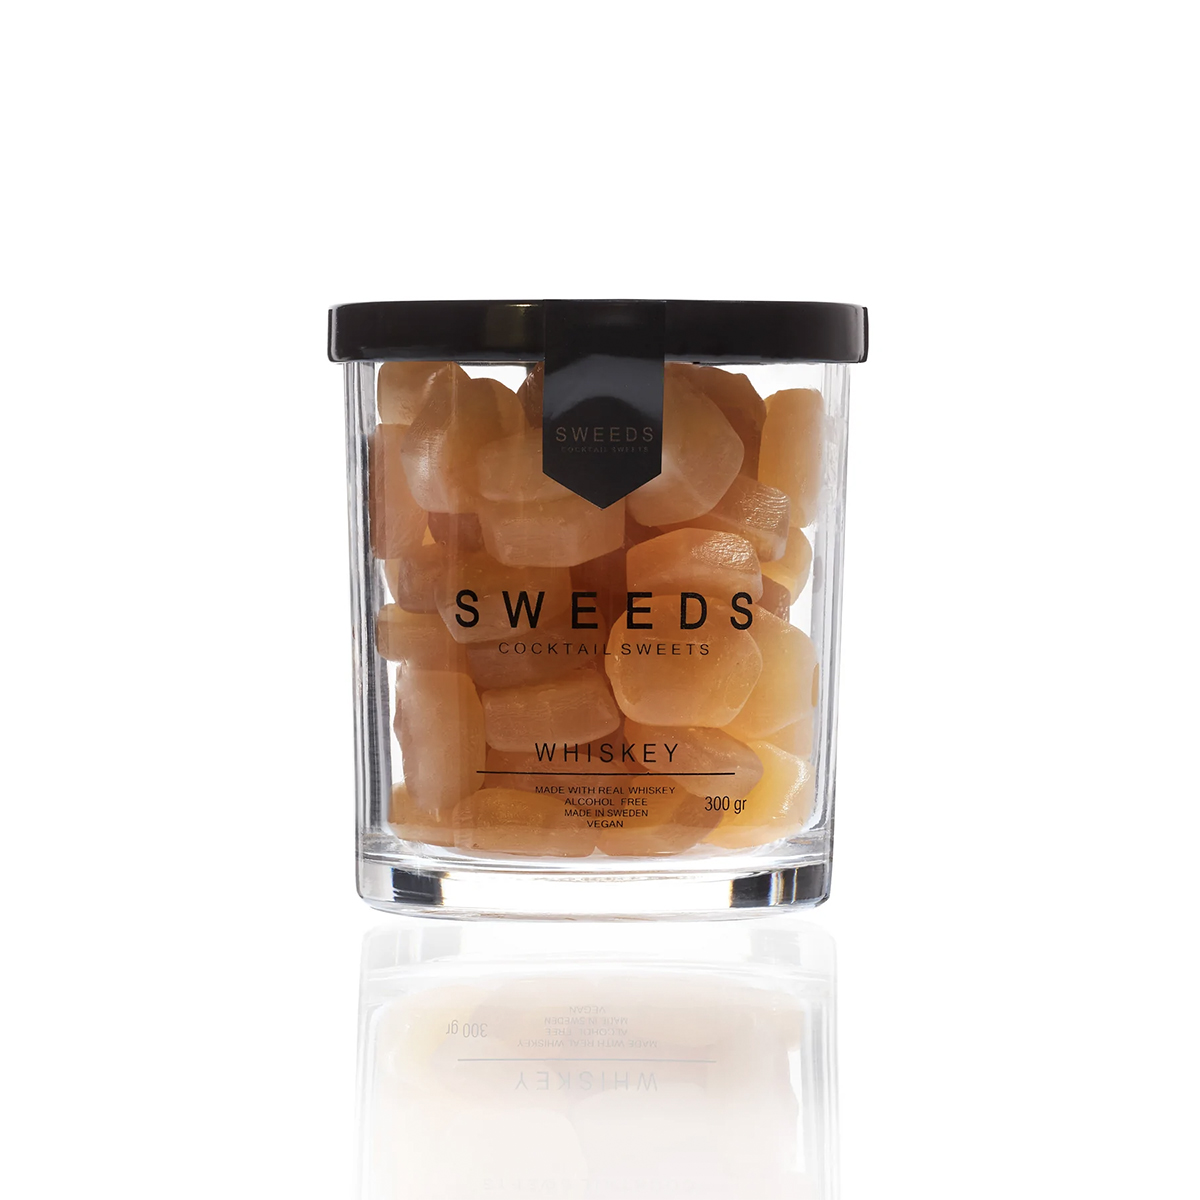 Sweeds Whiskey Cocktail Sweets